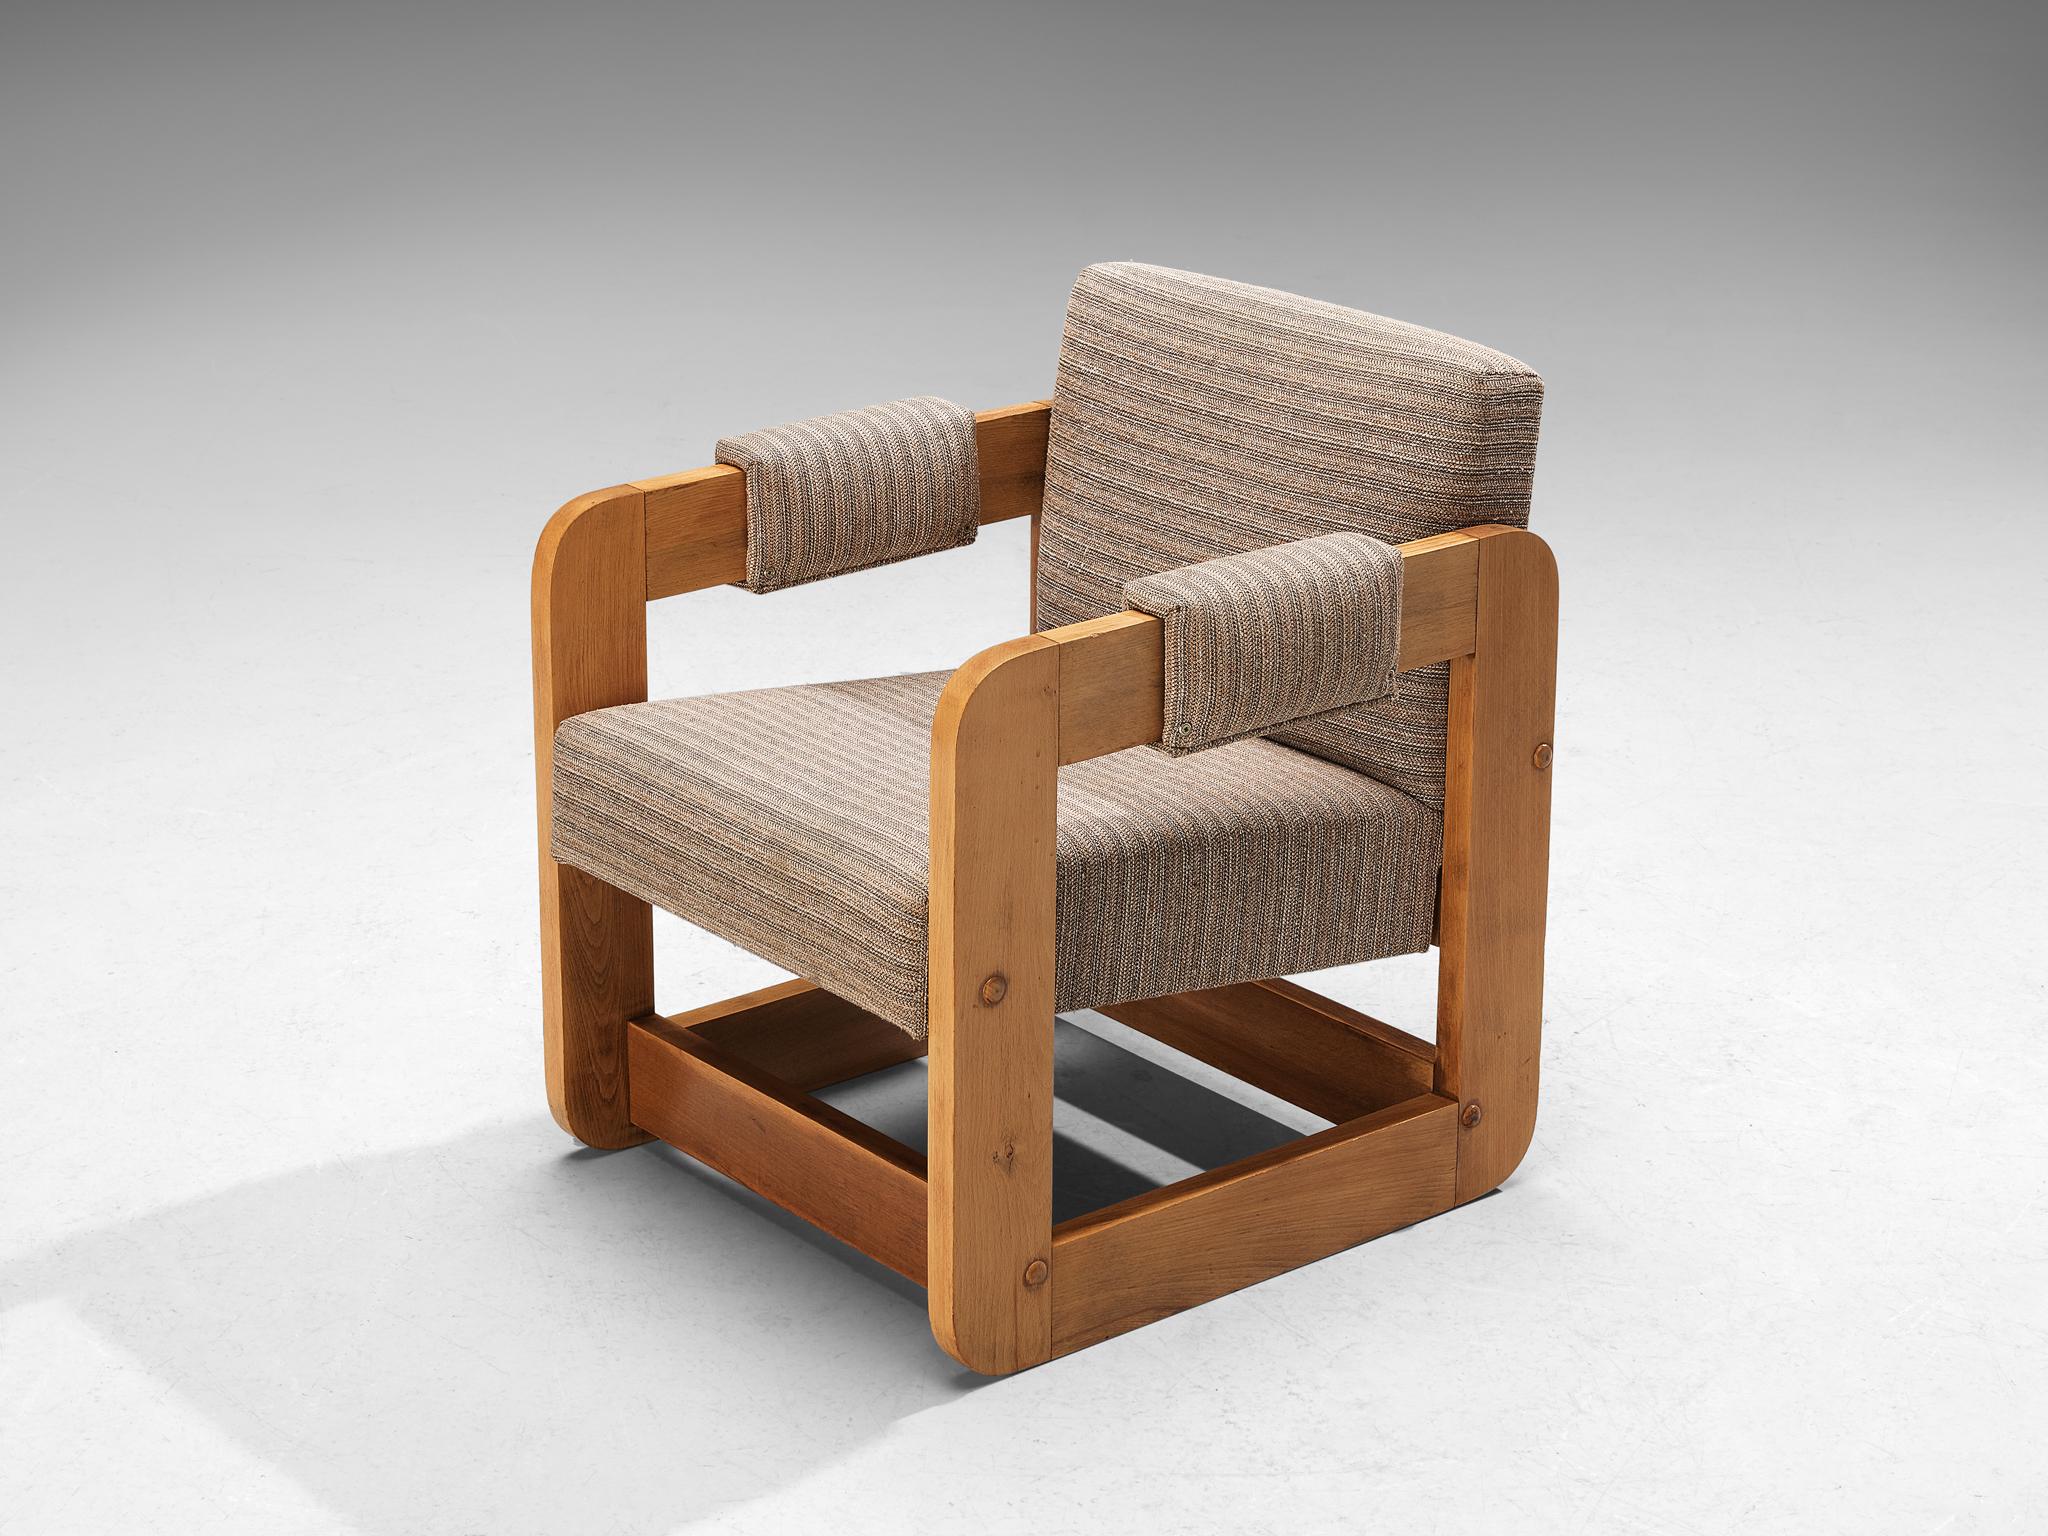 Lounge chair, beech, fabric, Europe, 1970s. 

Geometric shaped lounge chair composed of solely cubic forms. The wooden frame that function as an armrest is based on a square shape, which gives the unit an open and transparent appeal to the quite